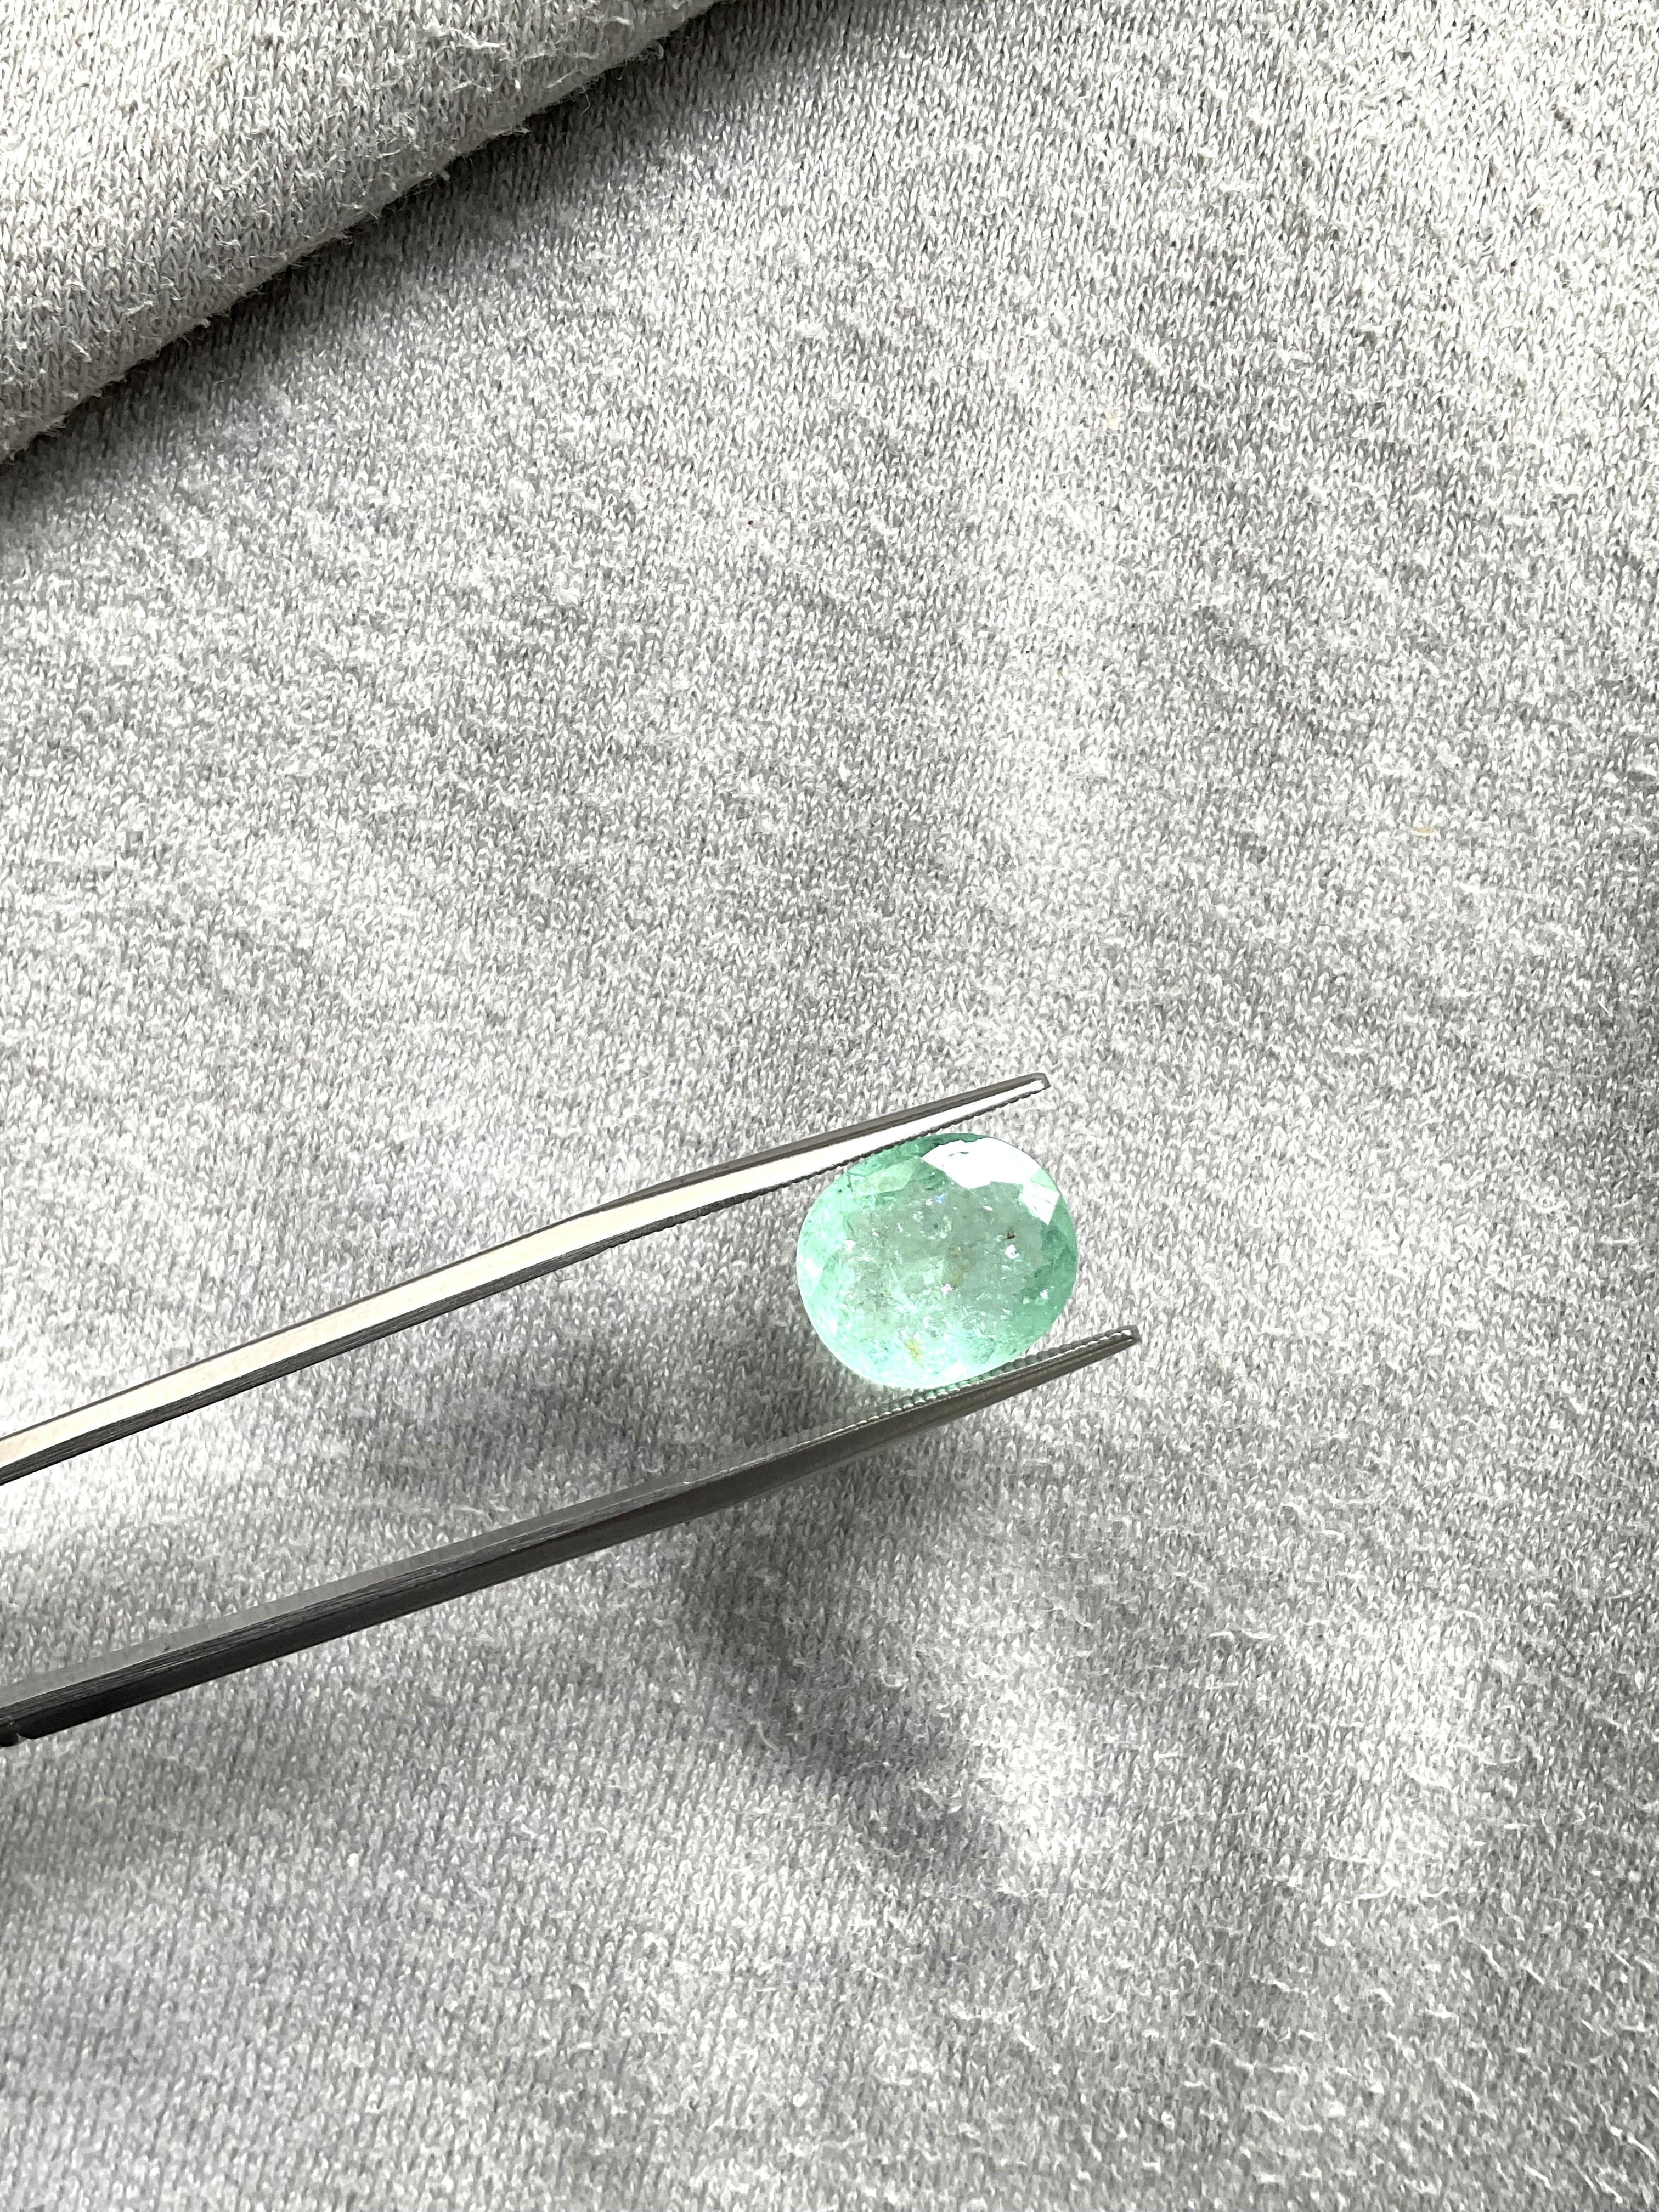 Certified 4.19 Carats Green Paraiba Tourmaline Oval Cut Stone for Fine Jewelry In New Condition For Sale In Jaipur, RJ